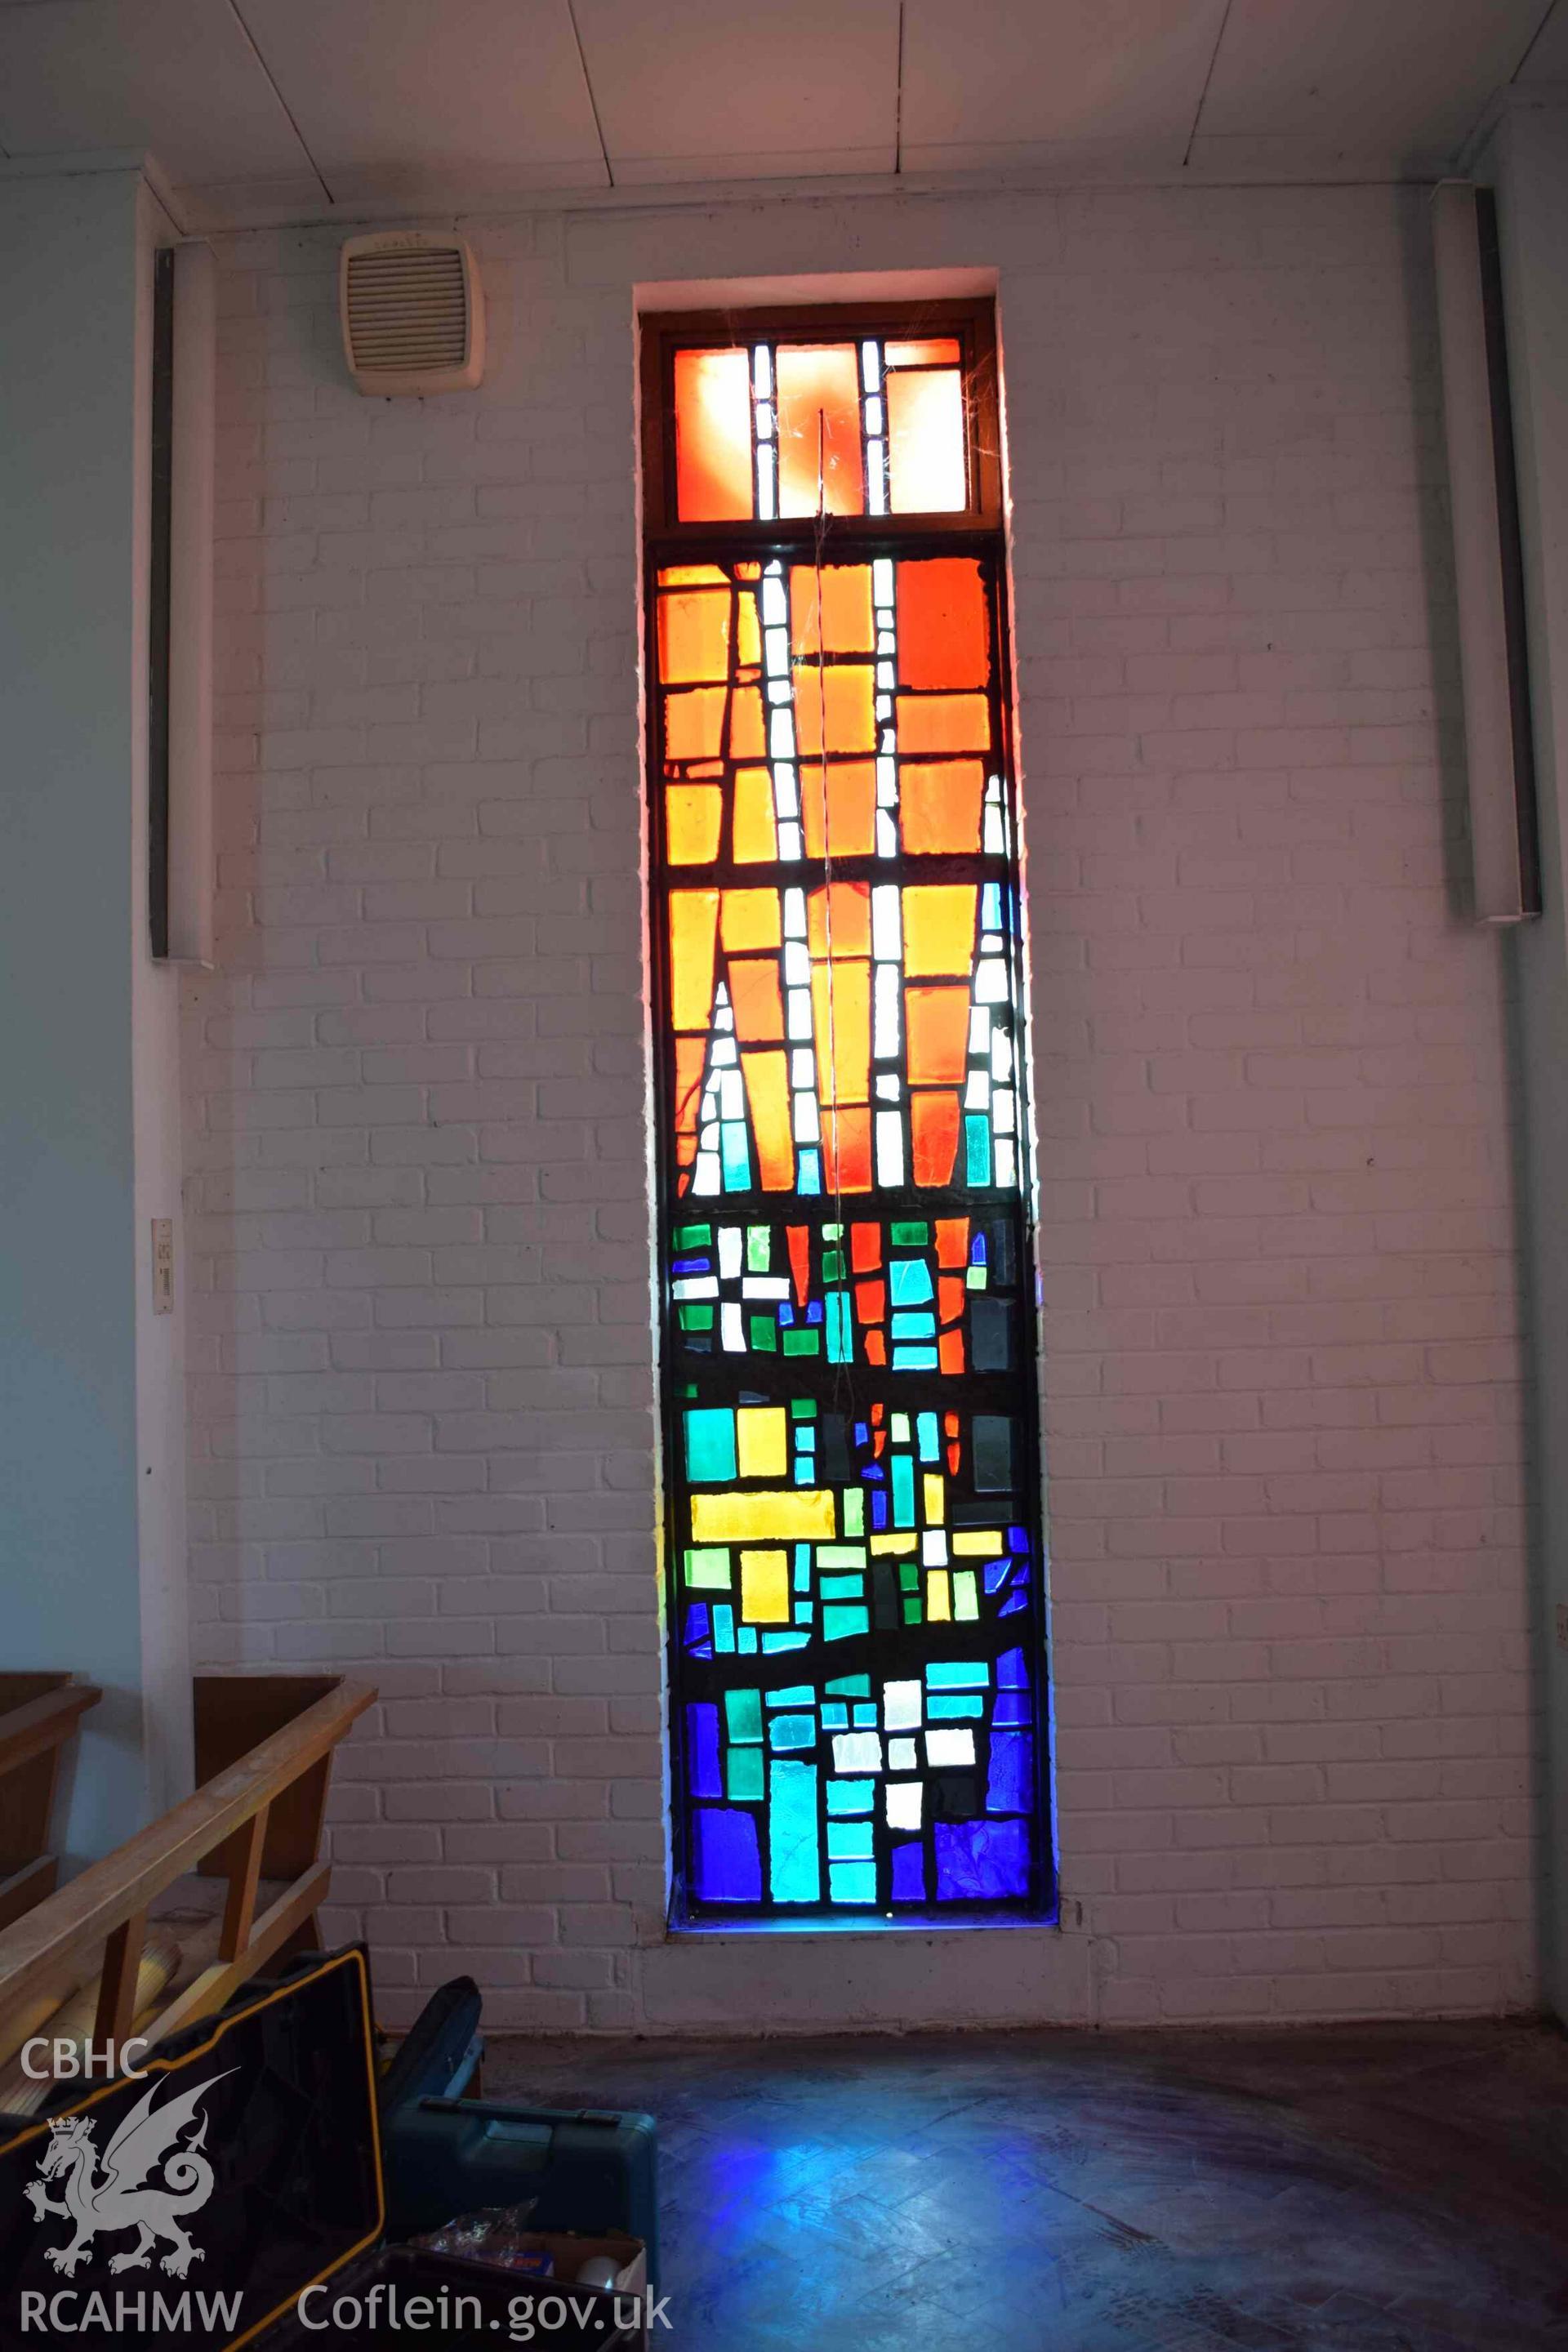 Photograph showing a Jonah Jones Dalle de Verre window (11a), at the church of The Resurrection of Our Saviour, Morfa Nefyn, taken on behalf of the Architectural Glass Centre during the removal of the windows in March 2019.